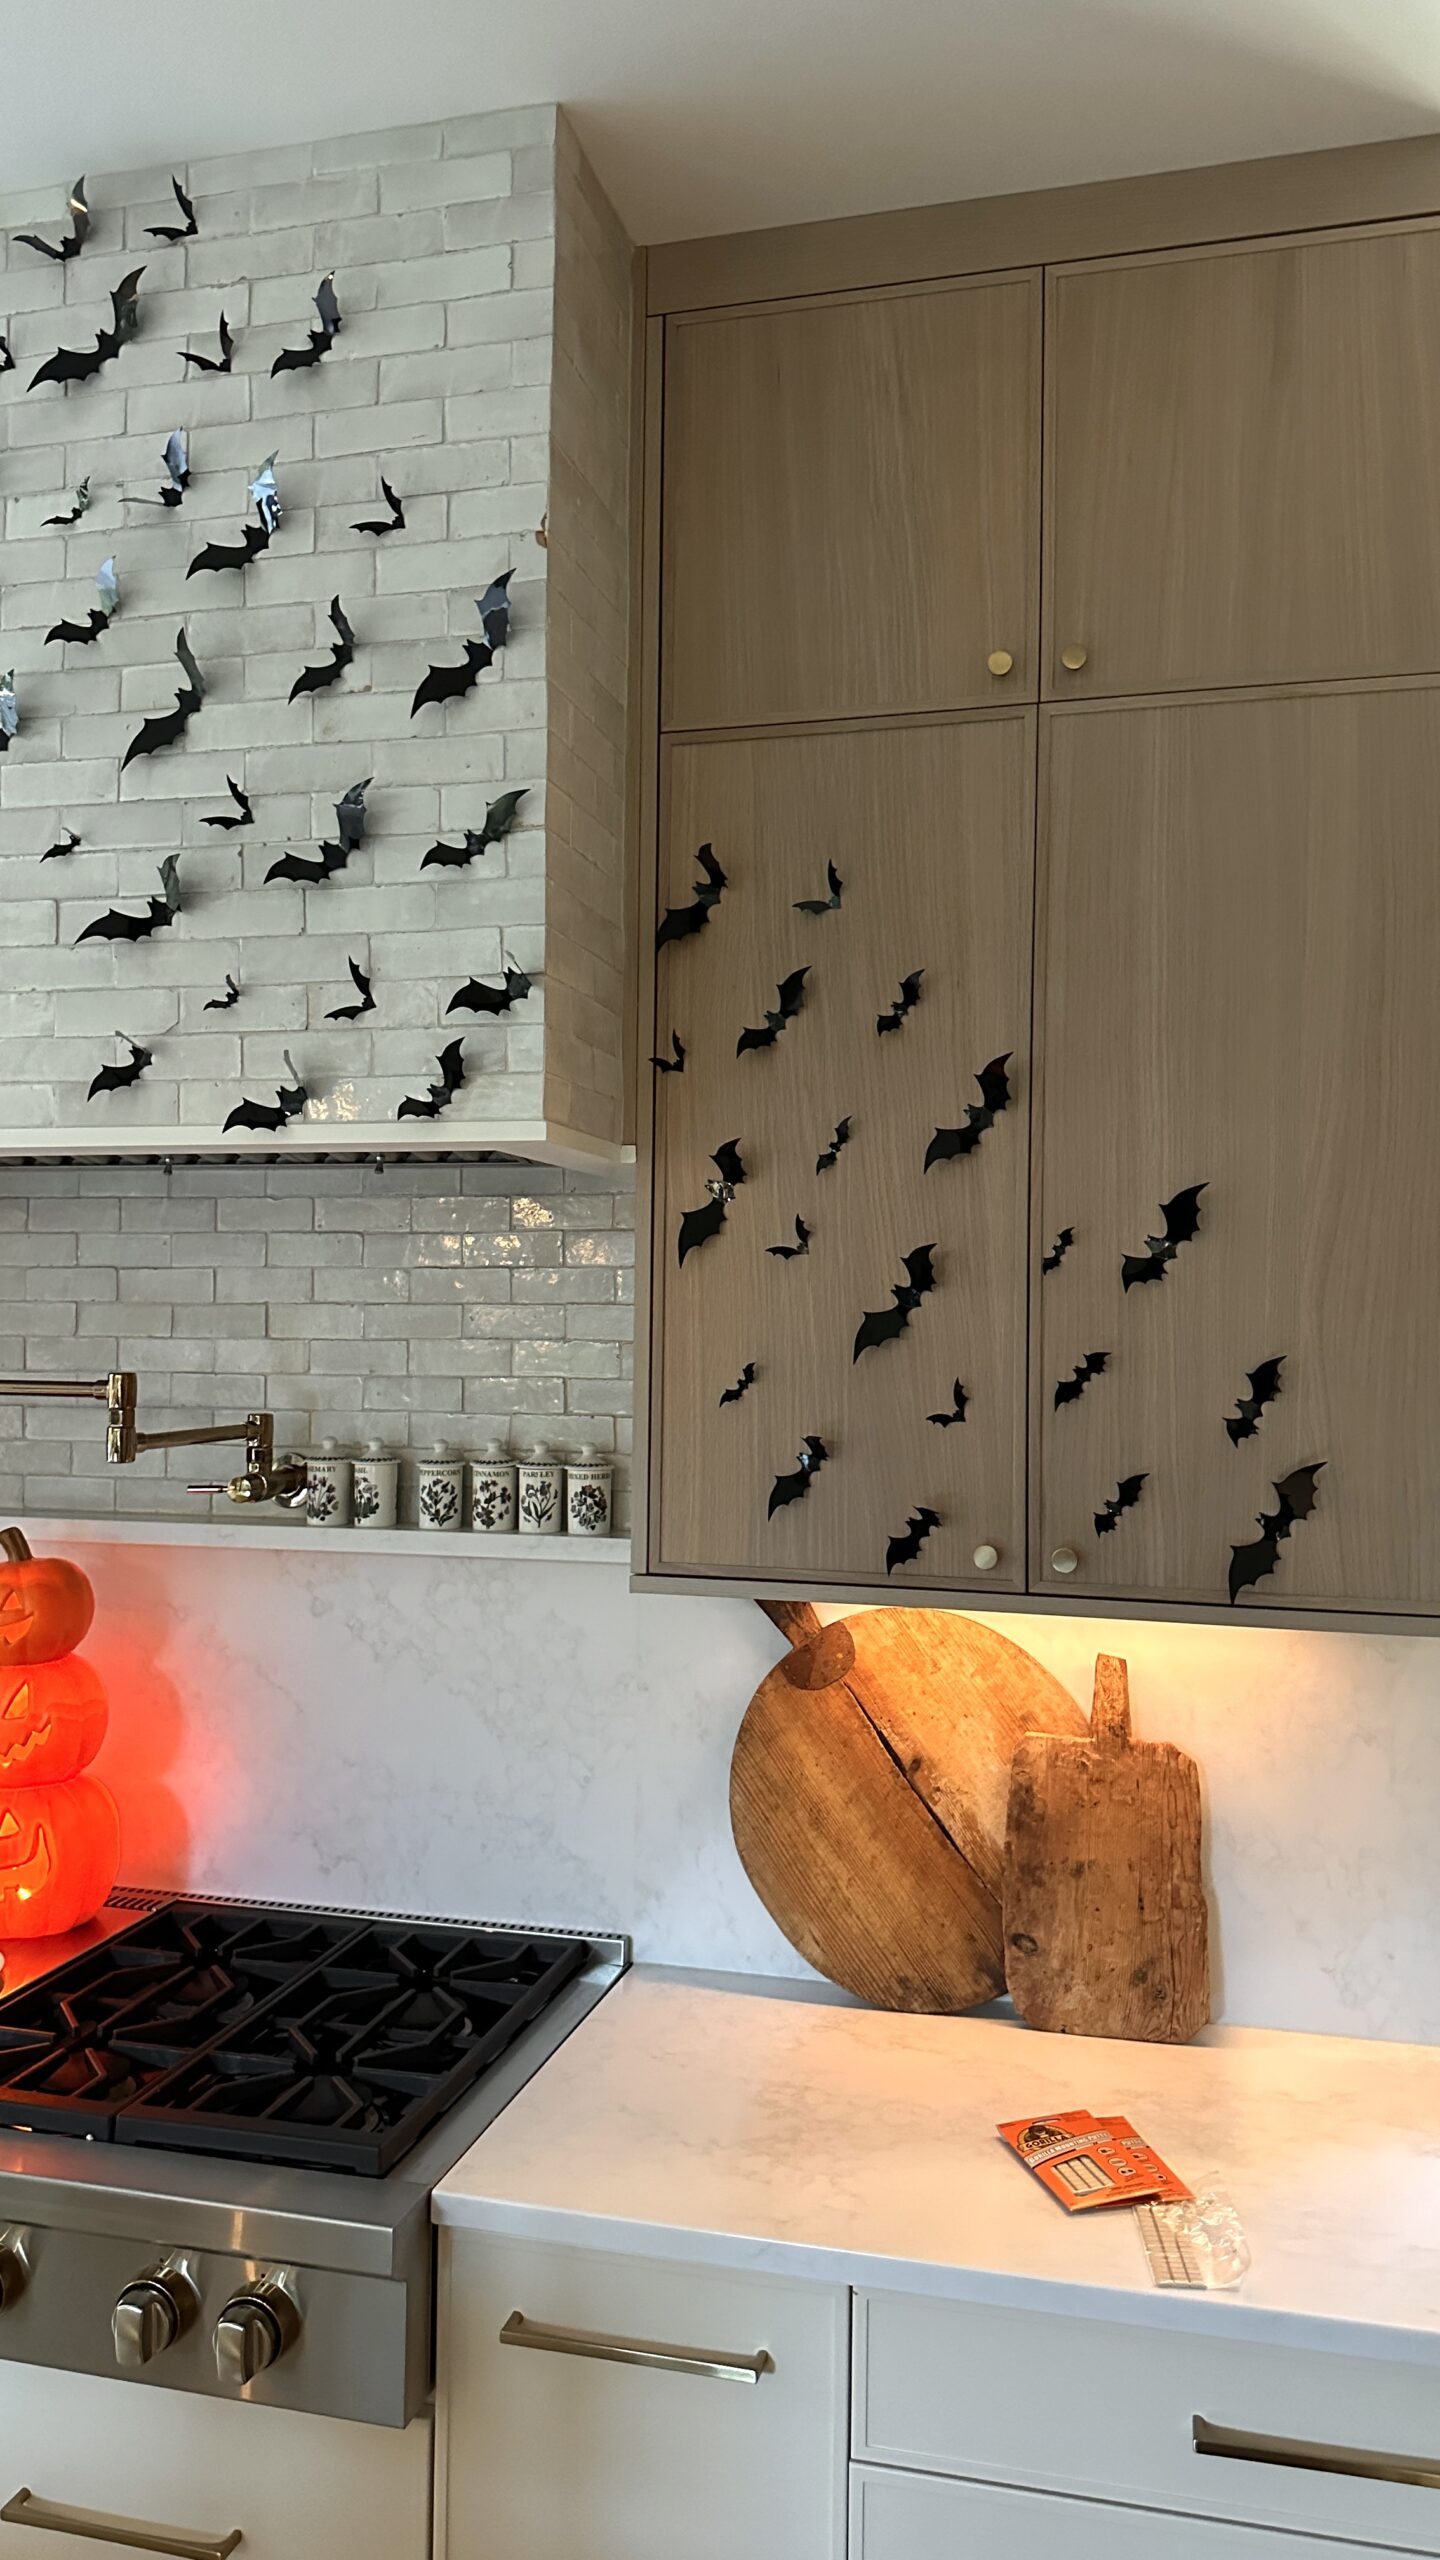 Halloween decor ideas for party, how to decorate for a halloween party, bats halloween decor | Sabrina Tan Home